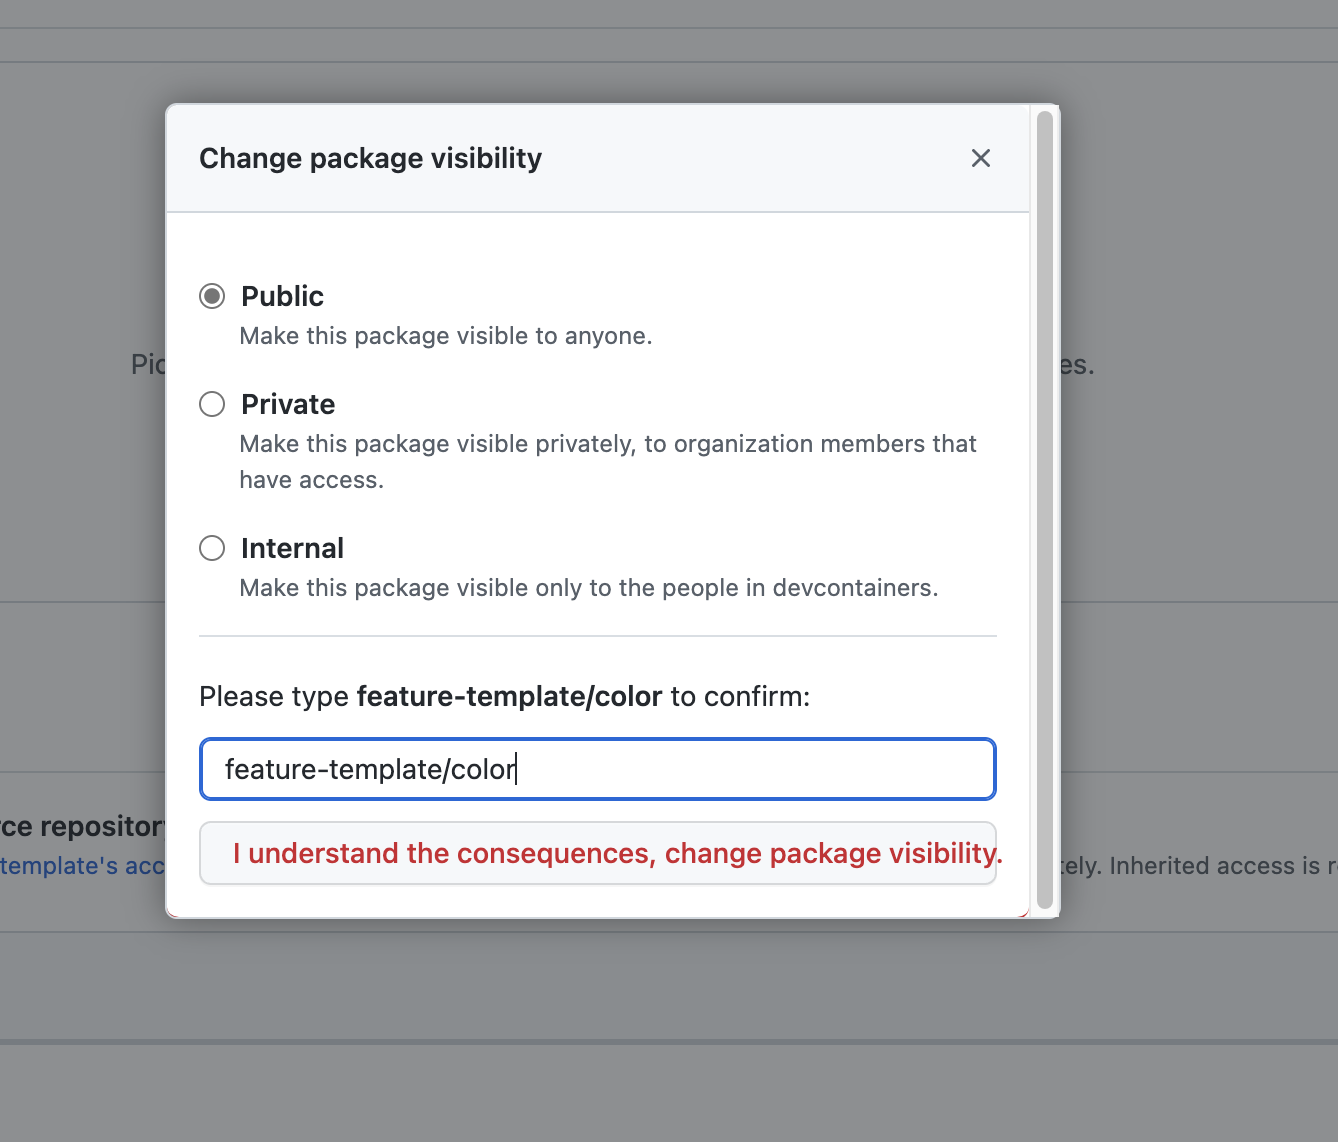 Changing package visibility to public